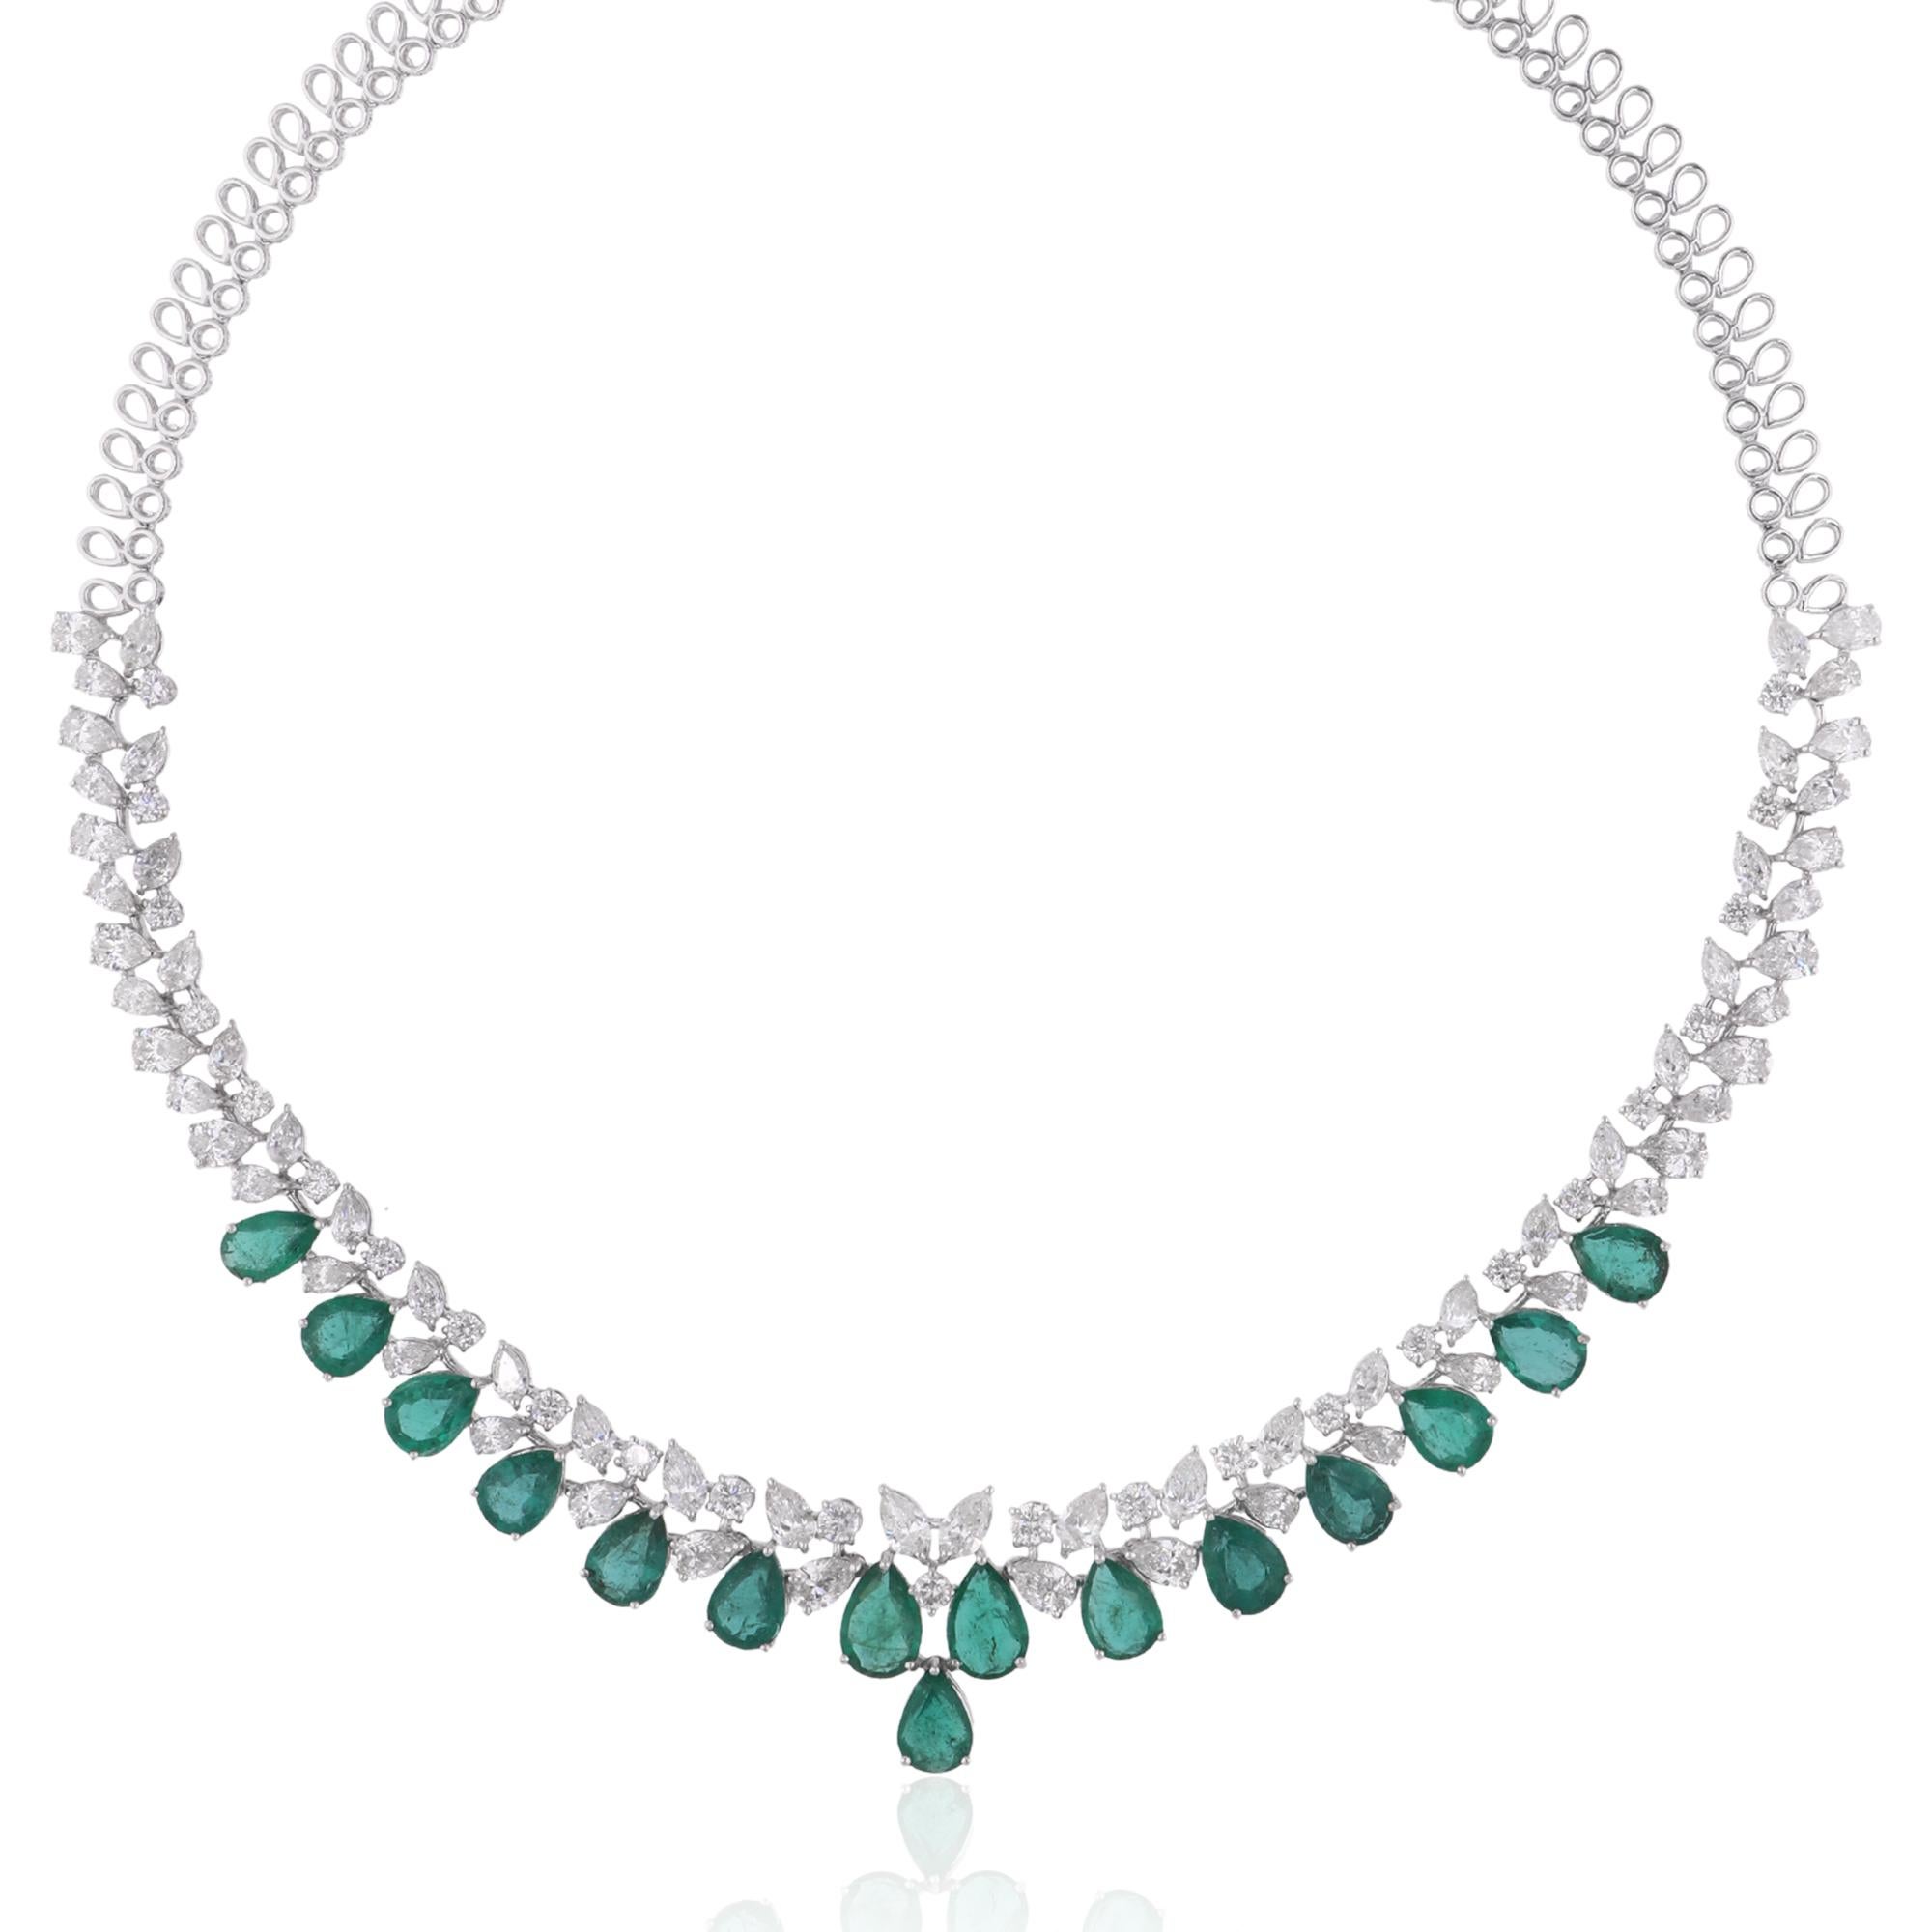 Elevate your style with the luxurious charm of this Pear Zambian Emerald Gemstone Choker Necklace, accented by shimmering Diamonds and meticulously crafted in 14k White Gold. This exquisite piece of jewelry is a celebration of sophistication and